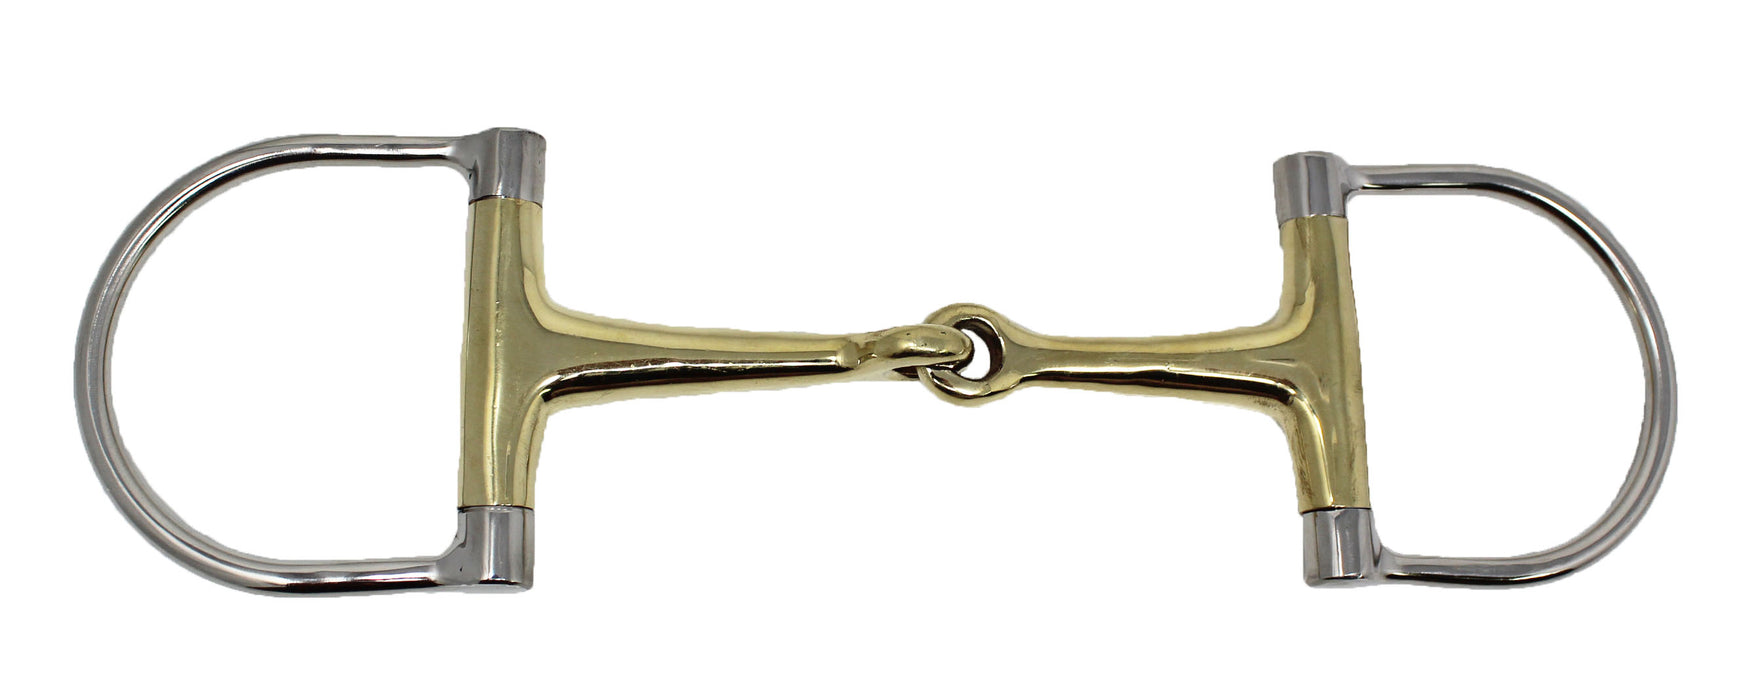 Horse STAINLESS STEEL Brass Copper MOUTH D-RING SNAFFLE  BIT 35552